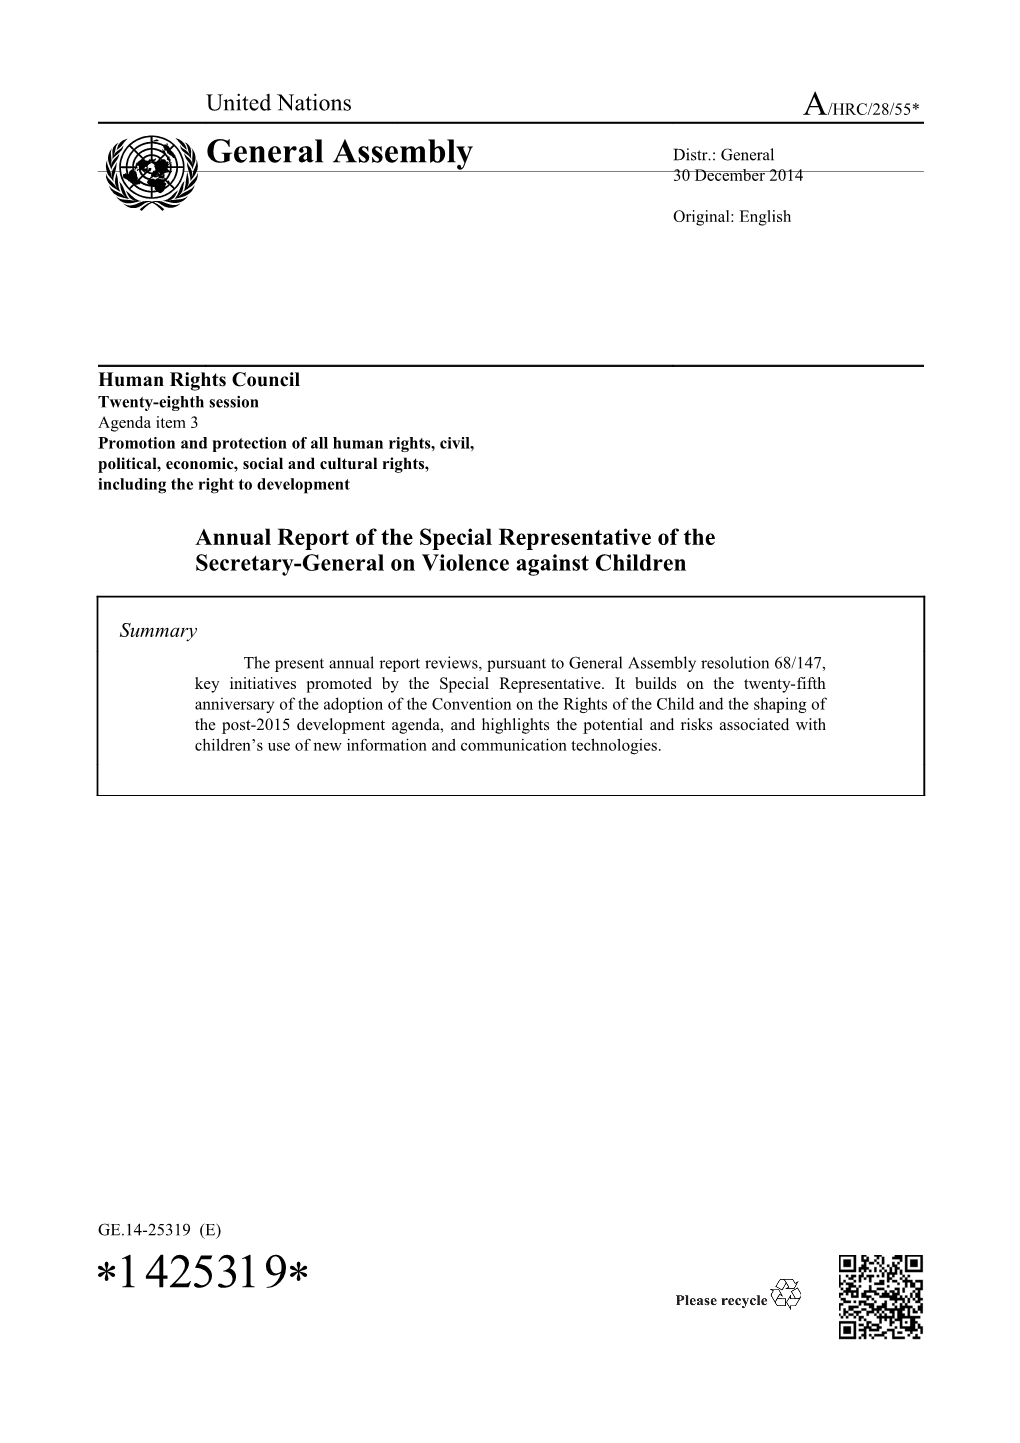 Annual Report of the Special Representative of the Secretary-General on Violence Against